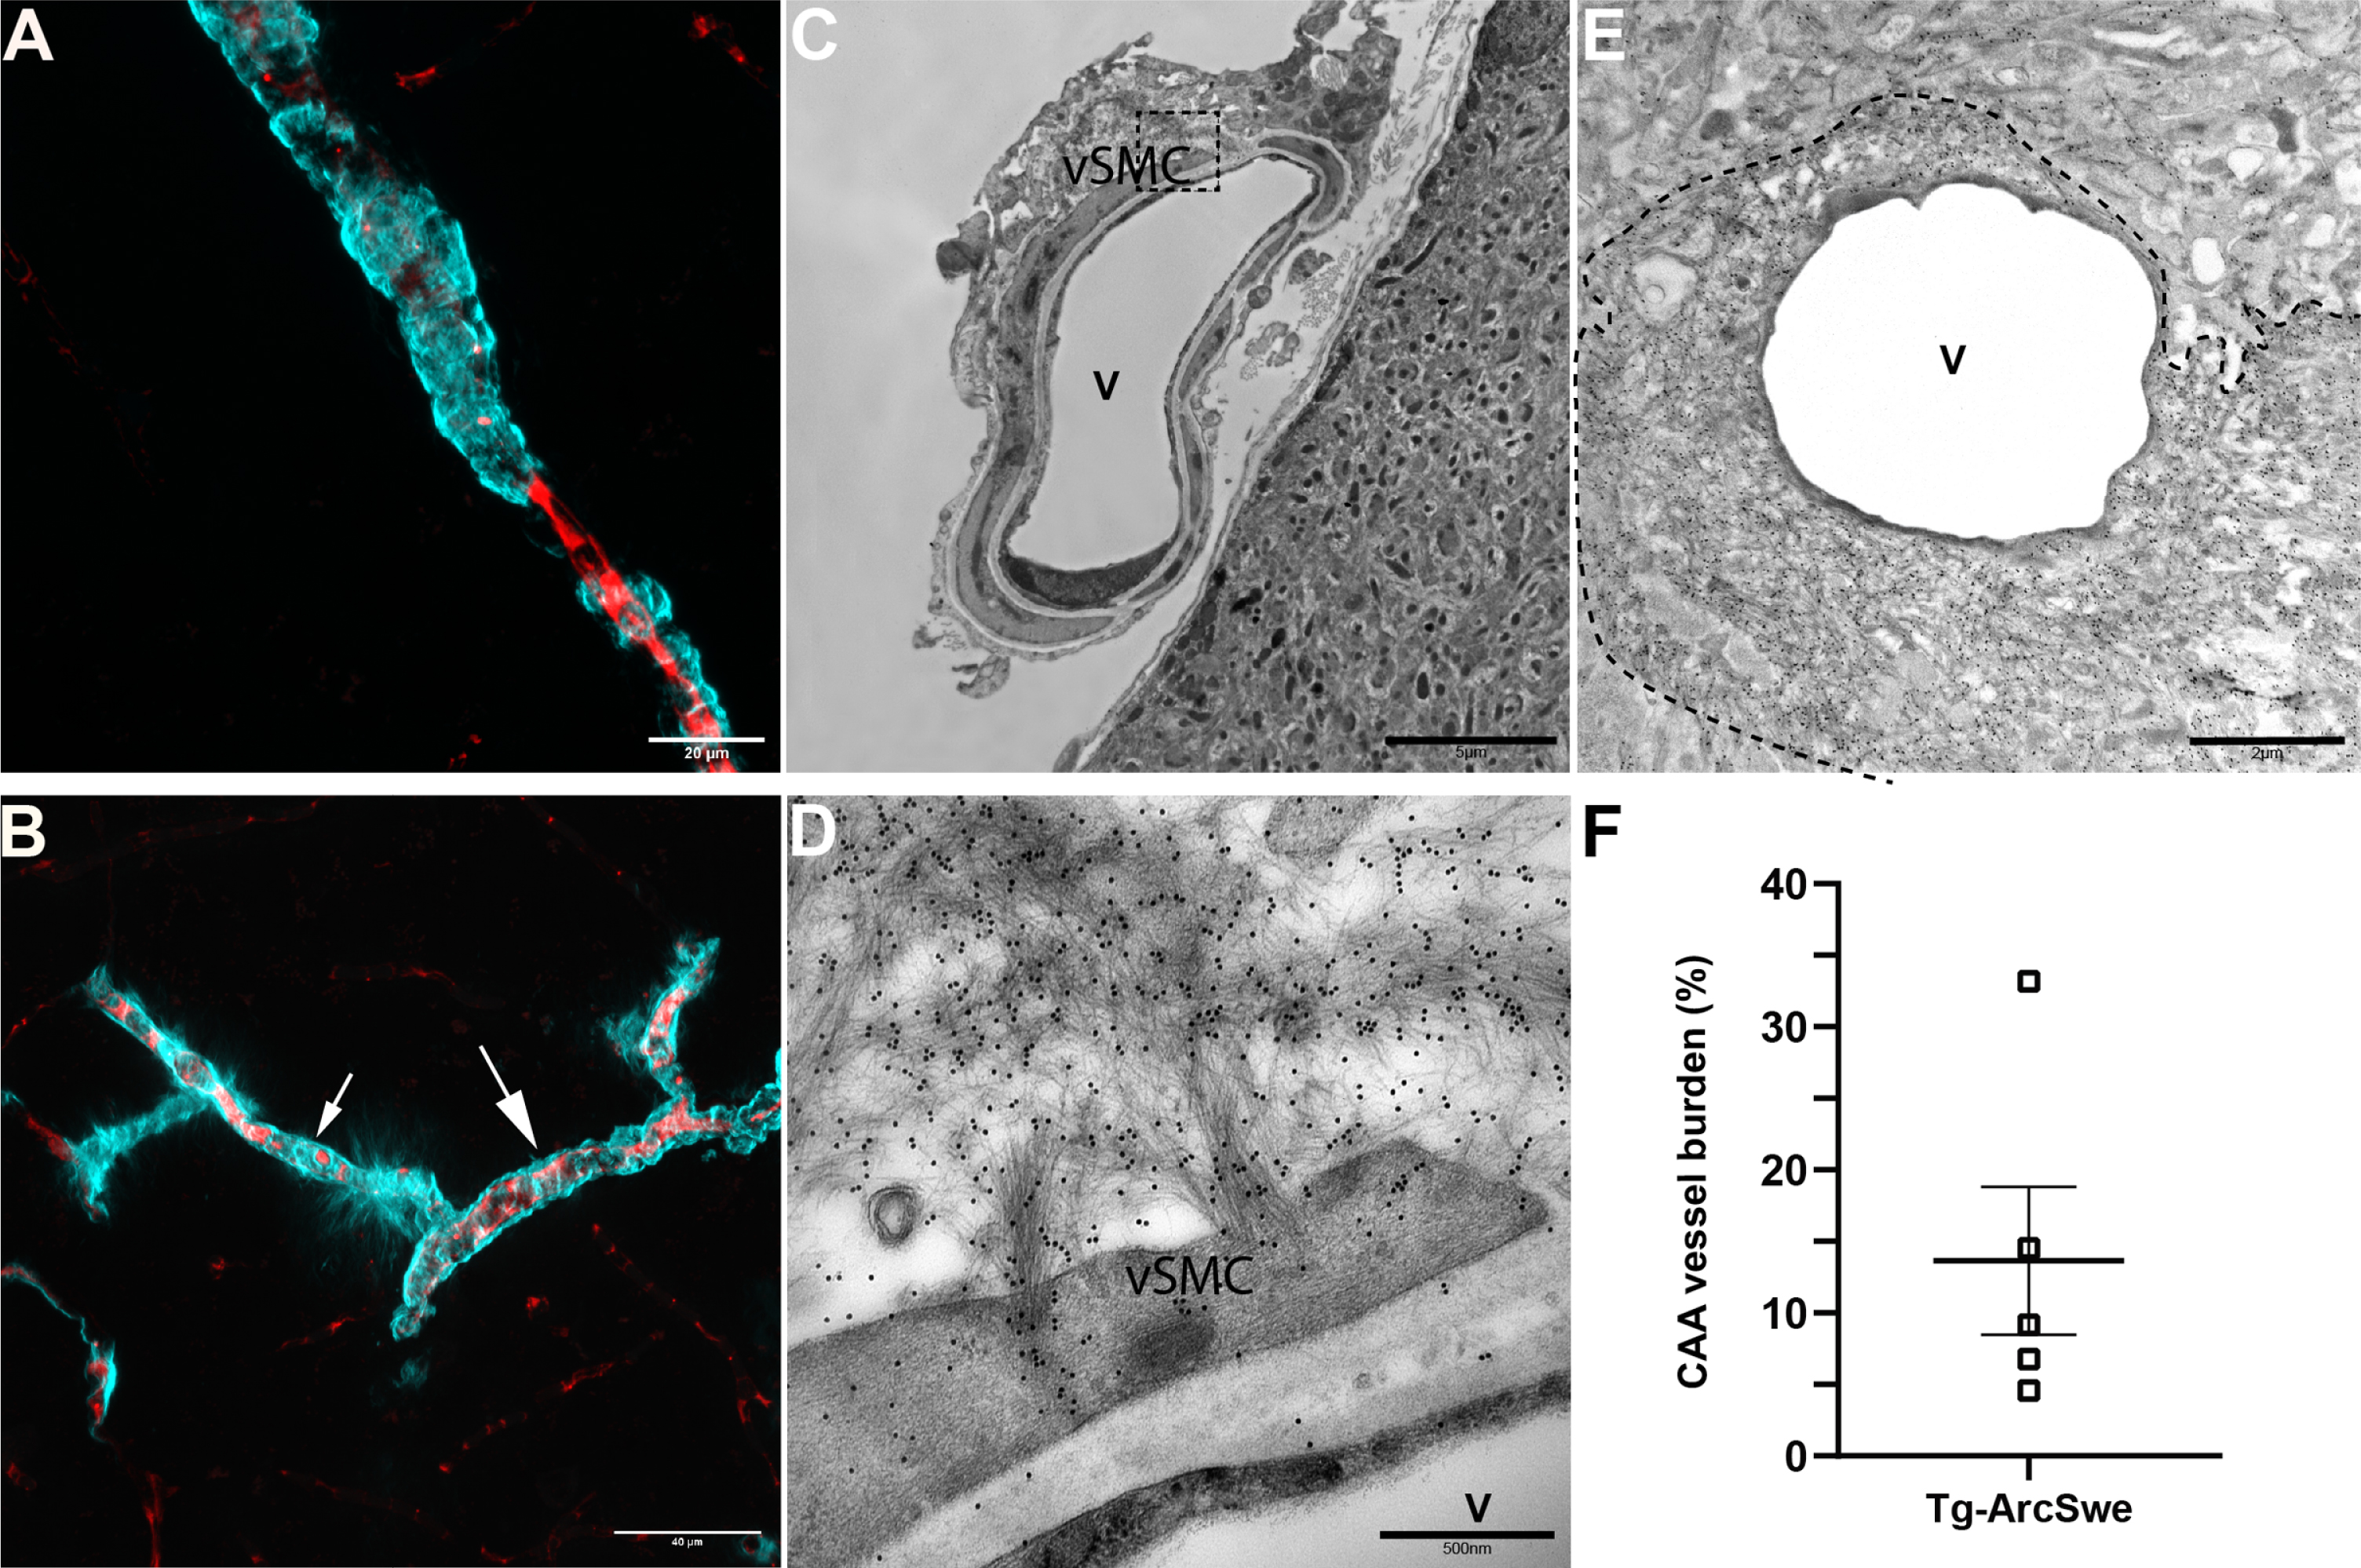 Aβ accumulates in leptomeningeal and penetrating arterioles and around capillaries in Tg-ArcSwe. A) Light microscopic image of a penetrating arteriole with CAA from the upper layer of cortex. Red, Texas red conjugated dextran; Cyan, Methoxy-X04. Scale bar 20μm. B) Light microscopic image of an arteriole (big arrow) and capillary (small arrow) in cerebral cortex in Tg-ArcSwe. The image demonstrates the difference in appearance of Aβ depositions. C) Electron micrograph of a leptomeningeal artery with Aβ accumulating in the vascular smooth muscle cells. Scale bar 5μm. D) Enlargement of marked area demonstrated in C. The image shows in detail how the Aβ fibrils deposits in the vSMCs. The Aβ fibrils are marked with immunogold histochemistry (black dots). Scale bar 500 nm. V, vessel; vSMC, vascular smooth muscle cell. E) An electron micrograph of a cortical capillary with Aβ accumulation marked with immunogold histochemistry. The dotted line marks the outer boundary of the Aβ fibrils. The fibrils are so densely packed near the endothelial cell making it difficult to define other cell types of the neurovascular unit. Scale bar 2μm. F) Quantitative assessment by unbiased stereology of CAA burden in cerebral cortex in 11–13-month-old Tg-ArcSwe animals demonstrated by area fraction. In these animals (n = 5) 13.66%±5.16% of the total vessels in cortex are affected by CAA. The data are presented as mean with SEM.